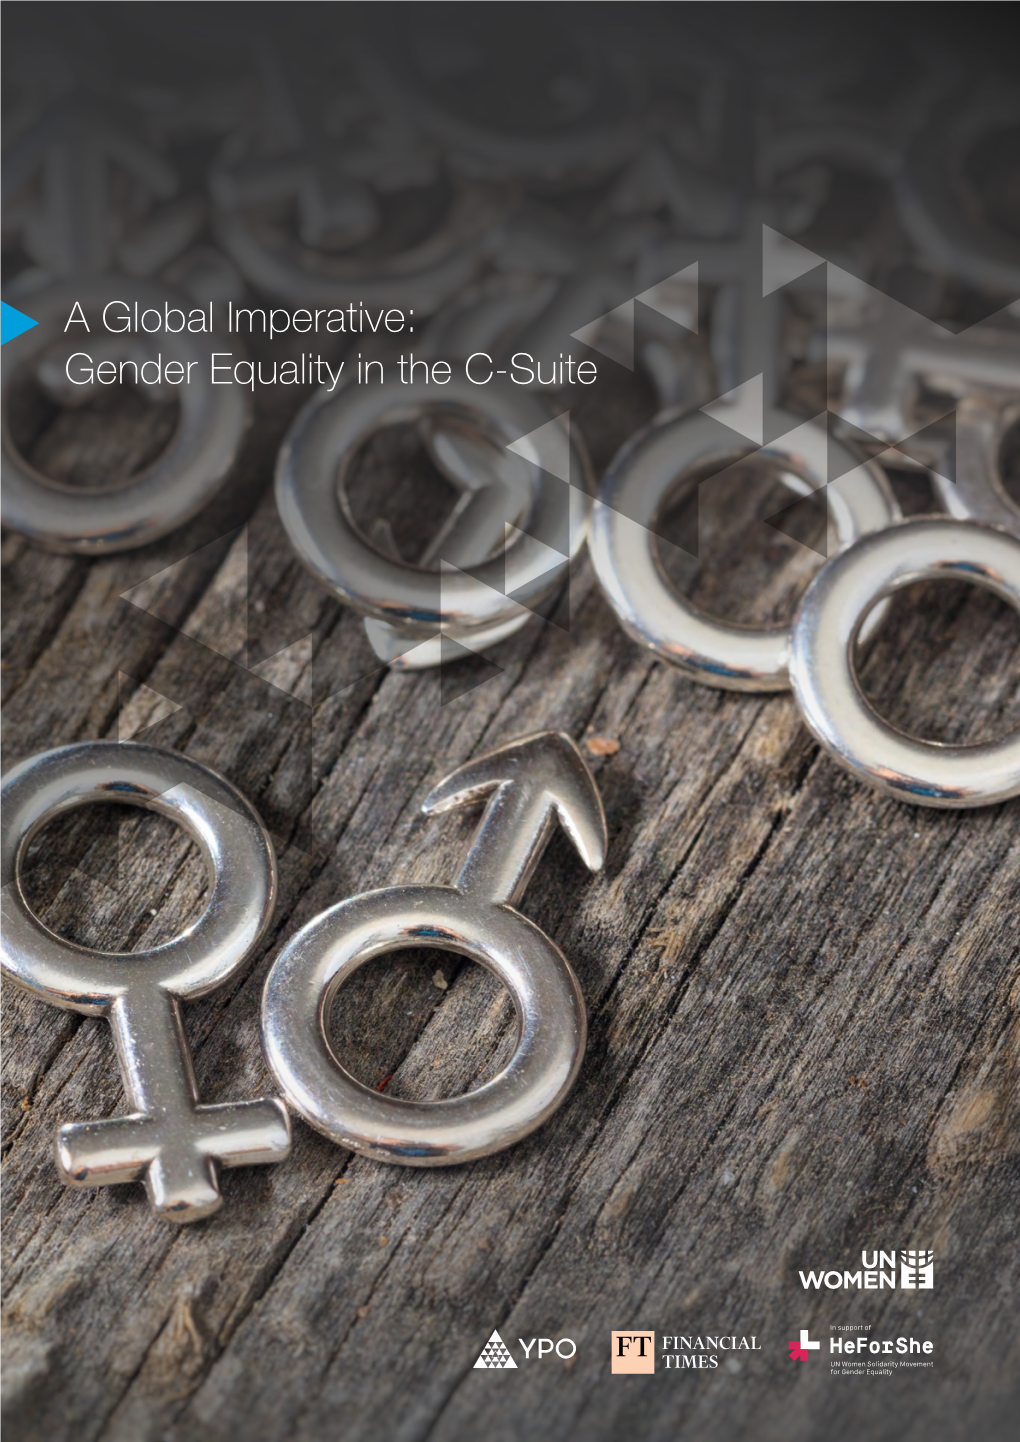 A Global Imperative: Gender Equality in the C-Suite